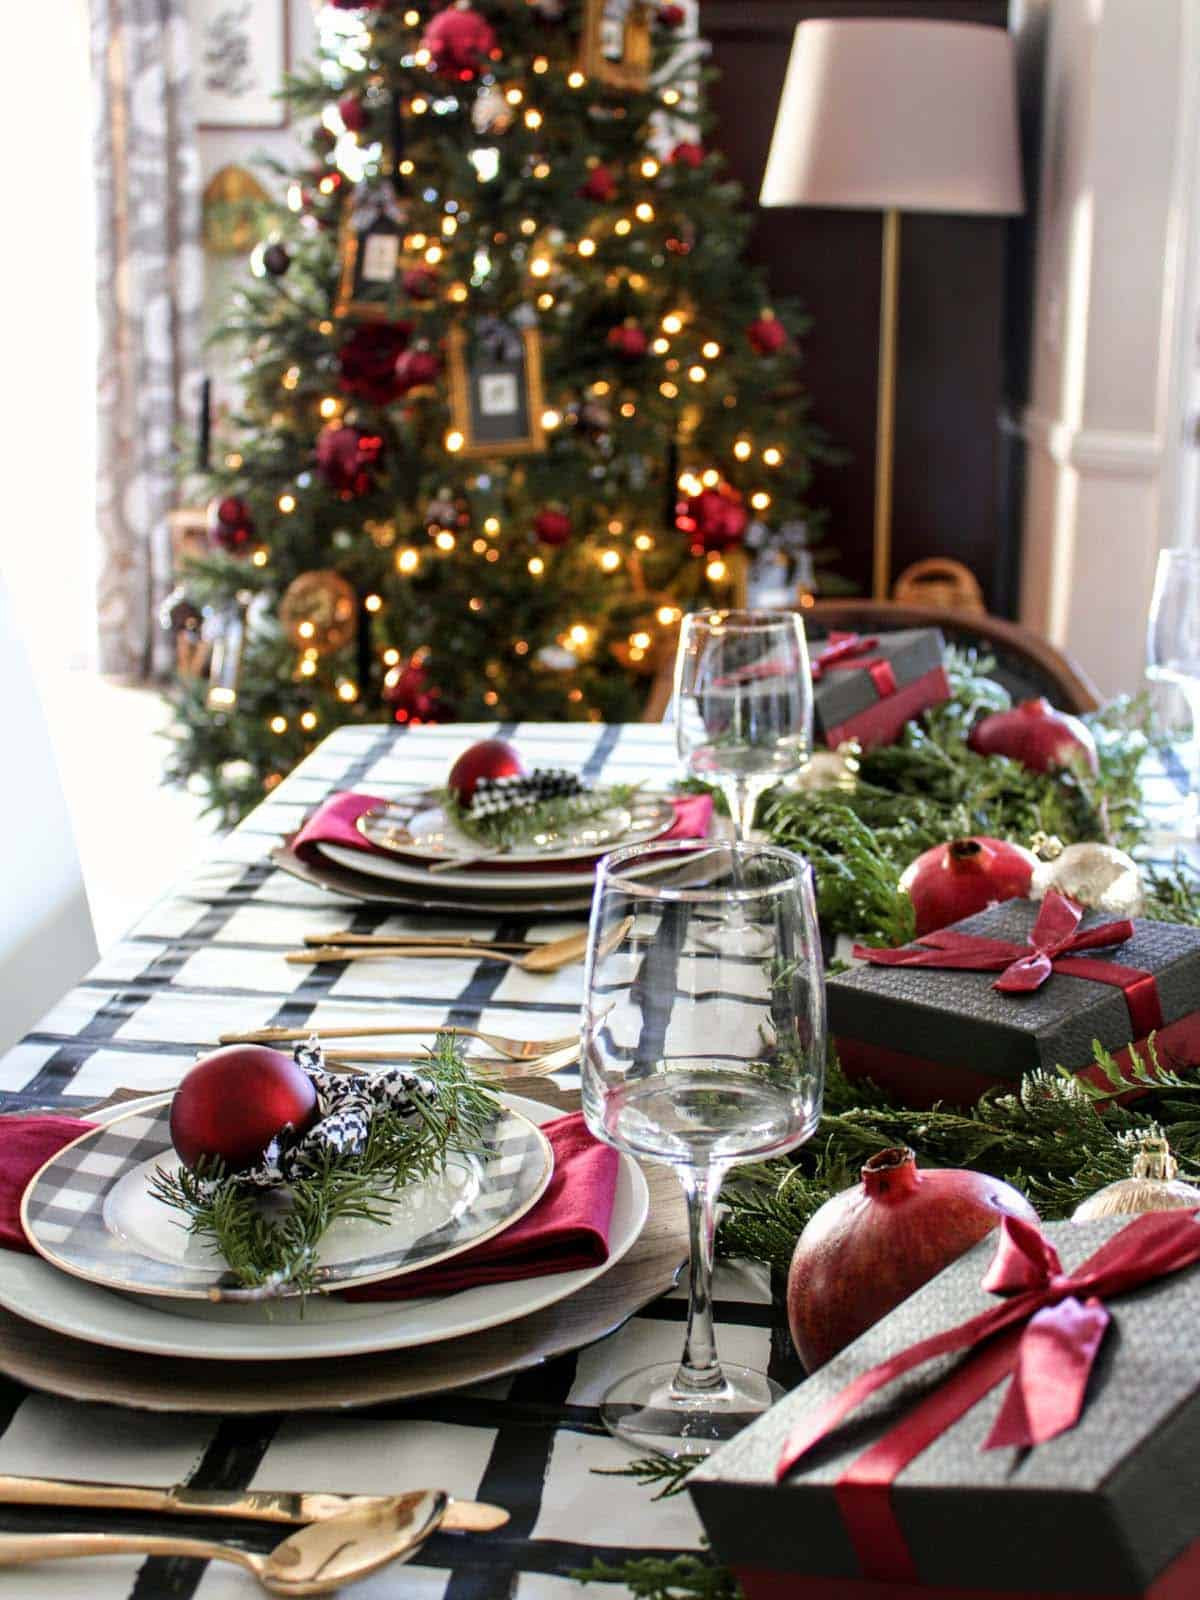 Christmas Table Centerpiece Ideas
 33 Inspiring Christmas decor ideas to elevate your dining